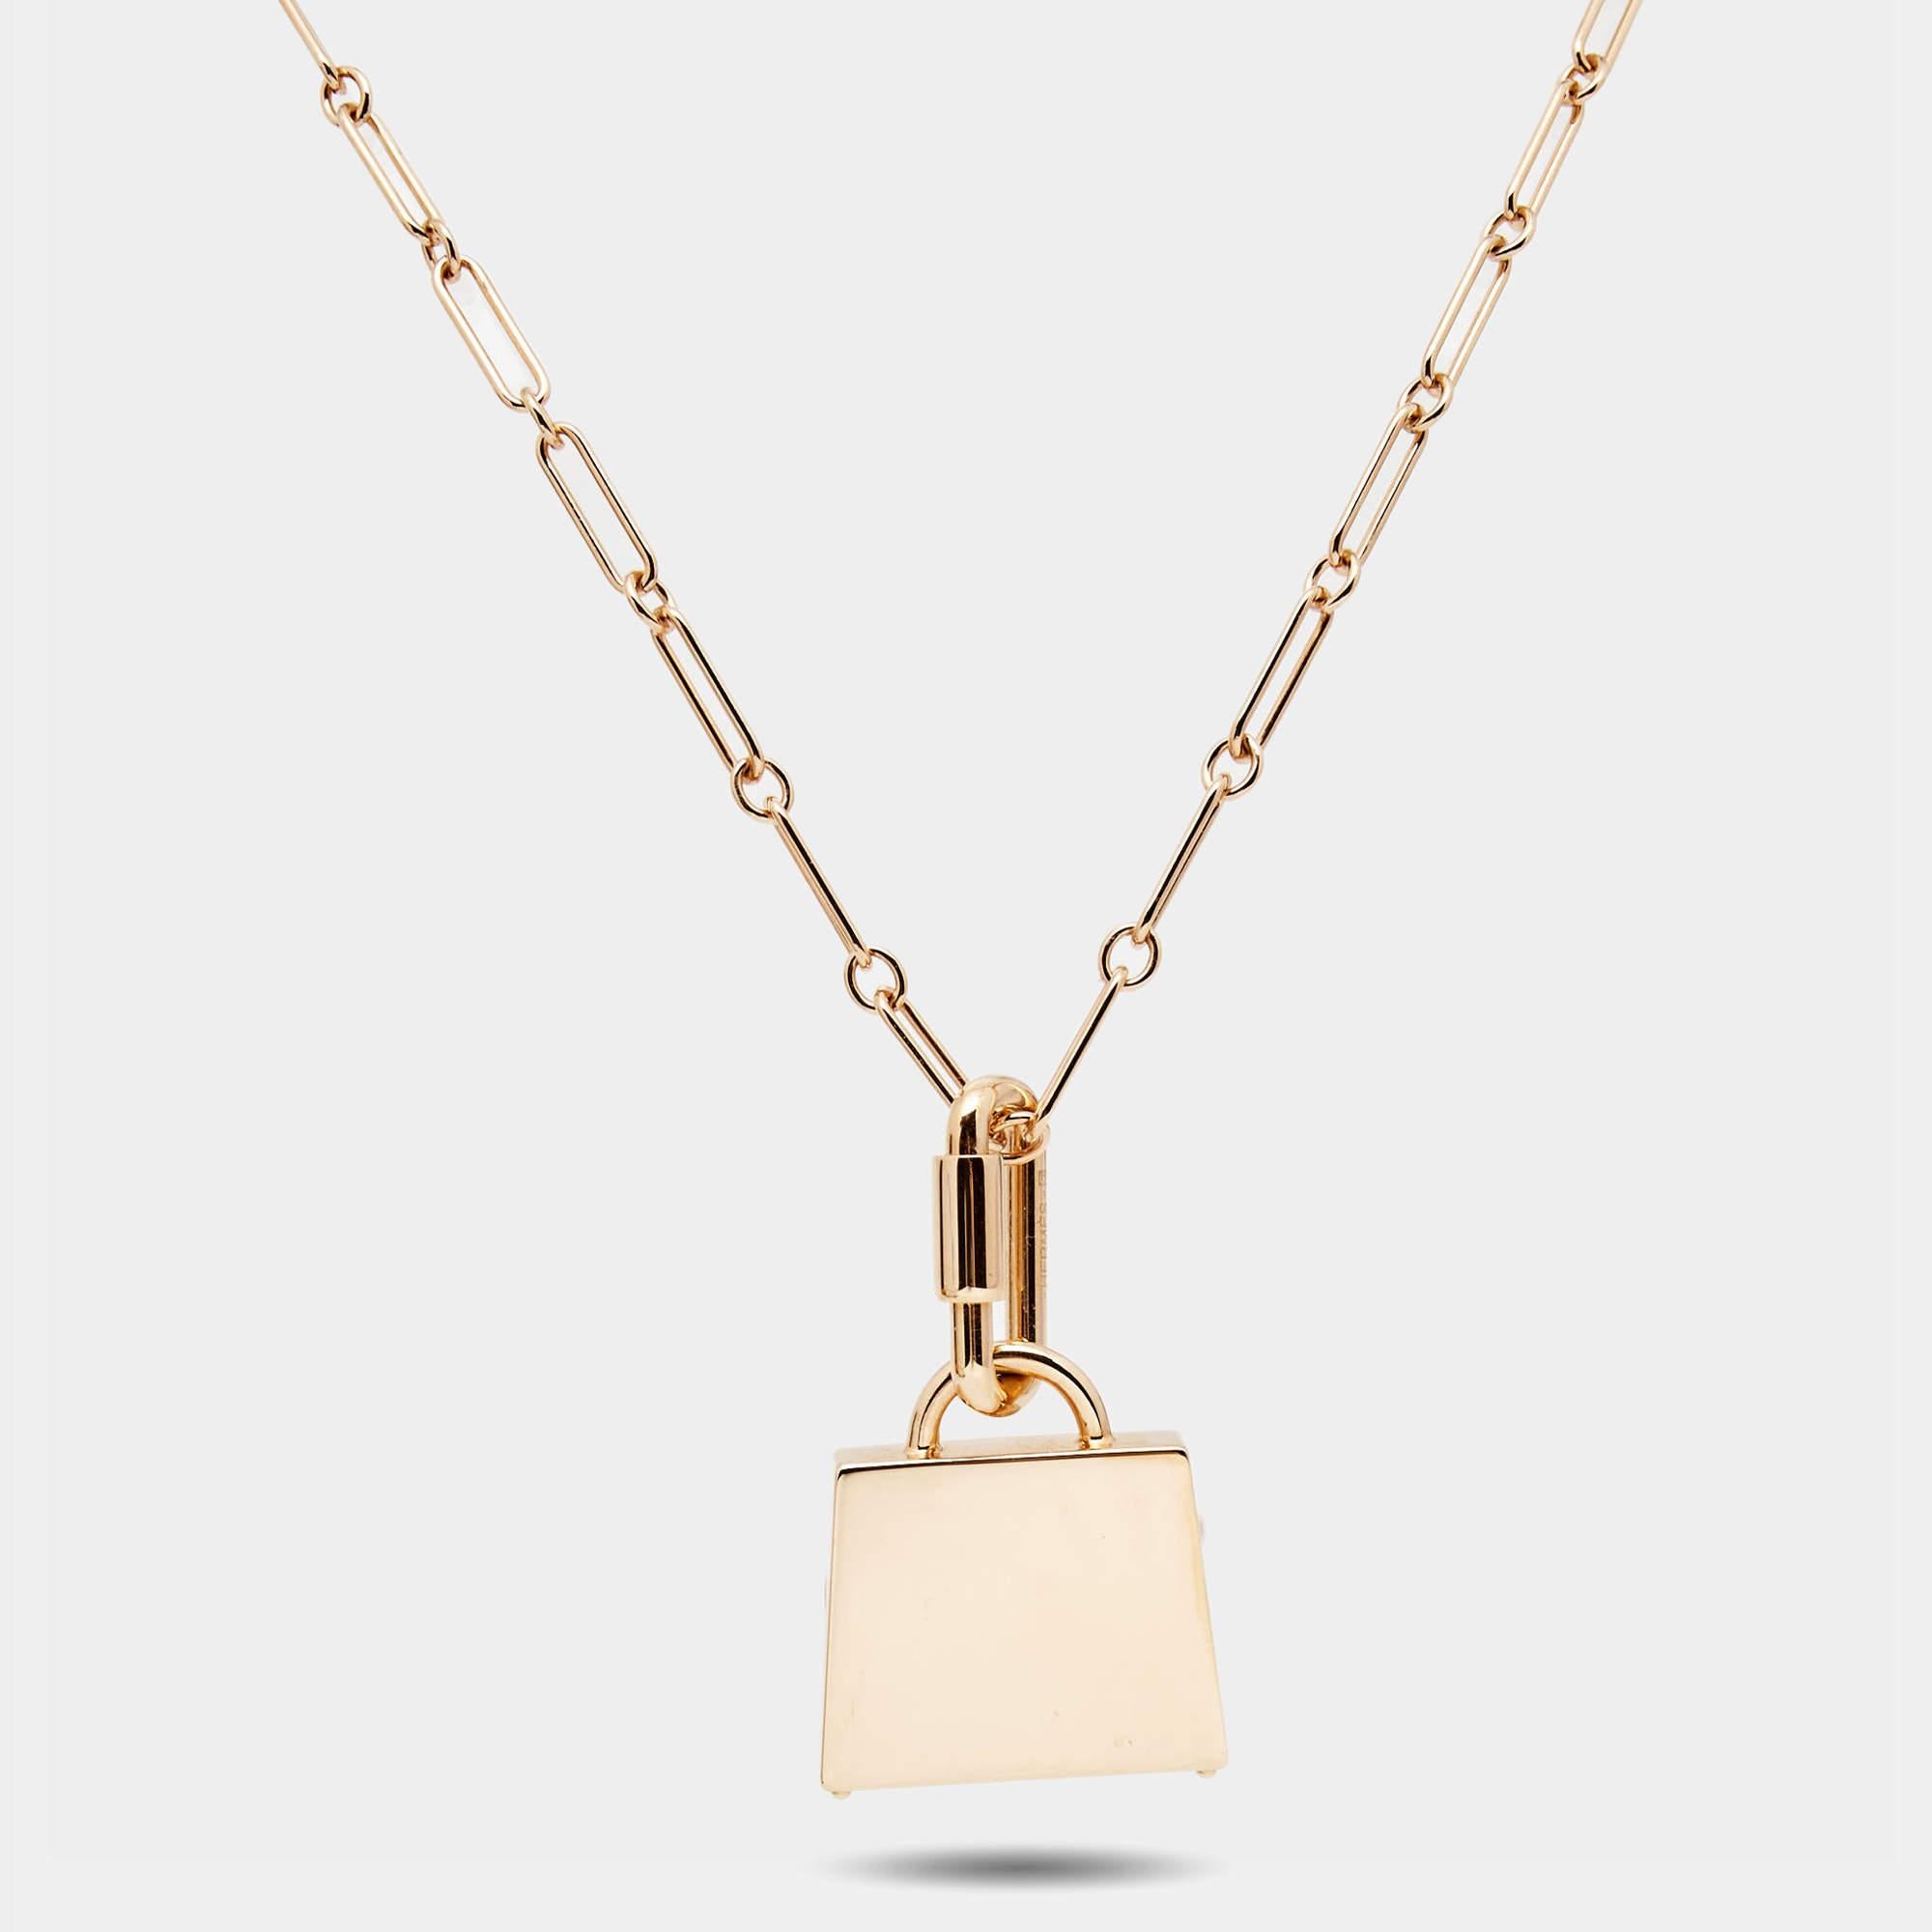 The Hermès necklace is an exquisite piece of jewelry. Crafted with precision, it features a luxurious gold-plated chain adorned with a delicate pendant in the iconic Kelly bag shape, showcasing the brand's timeless elegance and sophistication.

